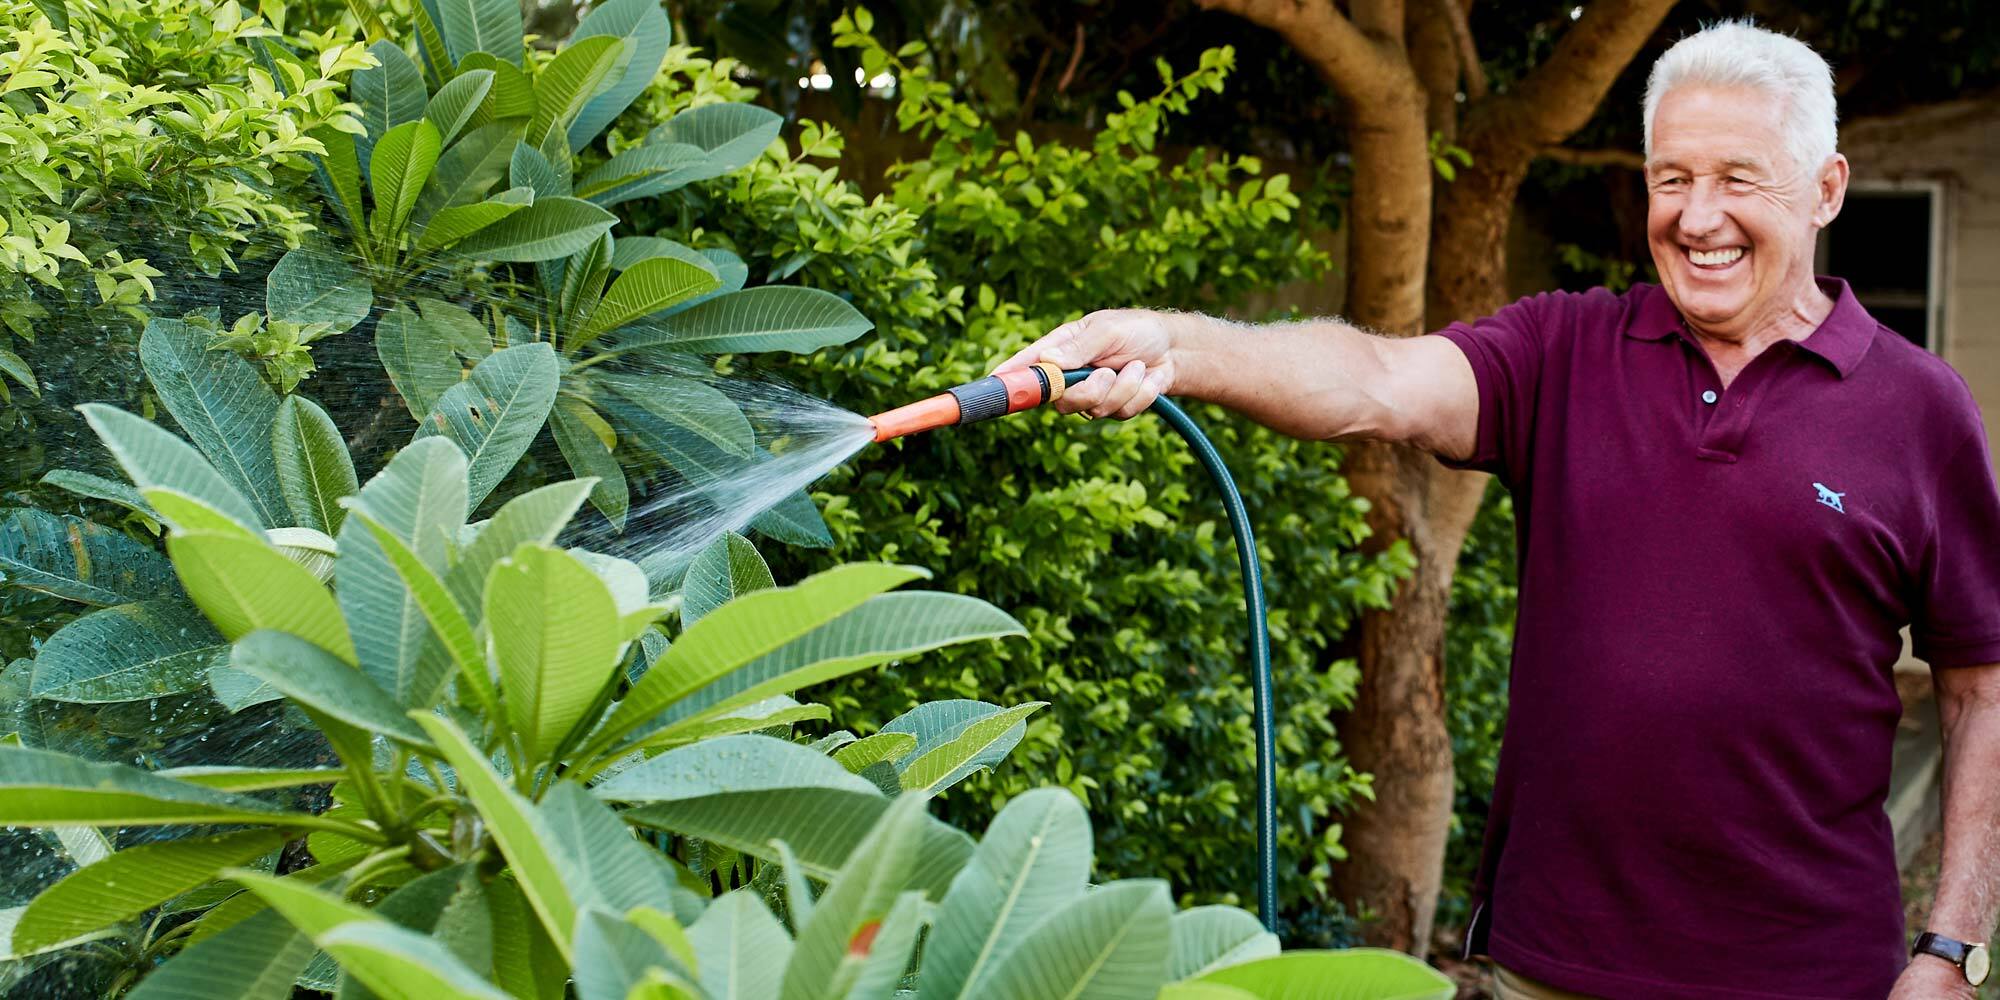 elderly man watering pants with a hose in the garden and smiling